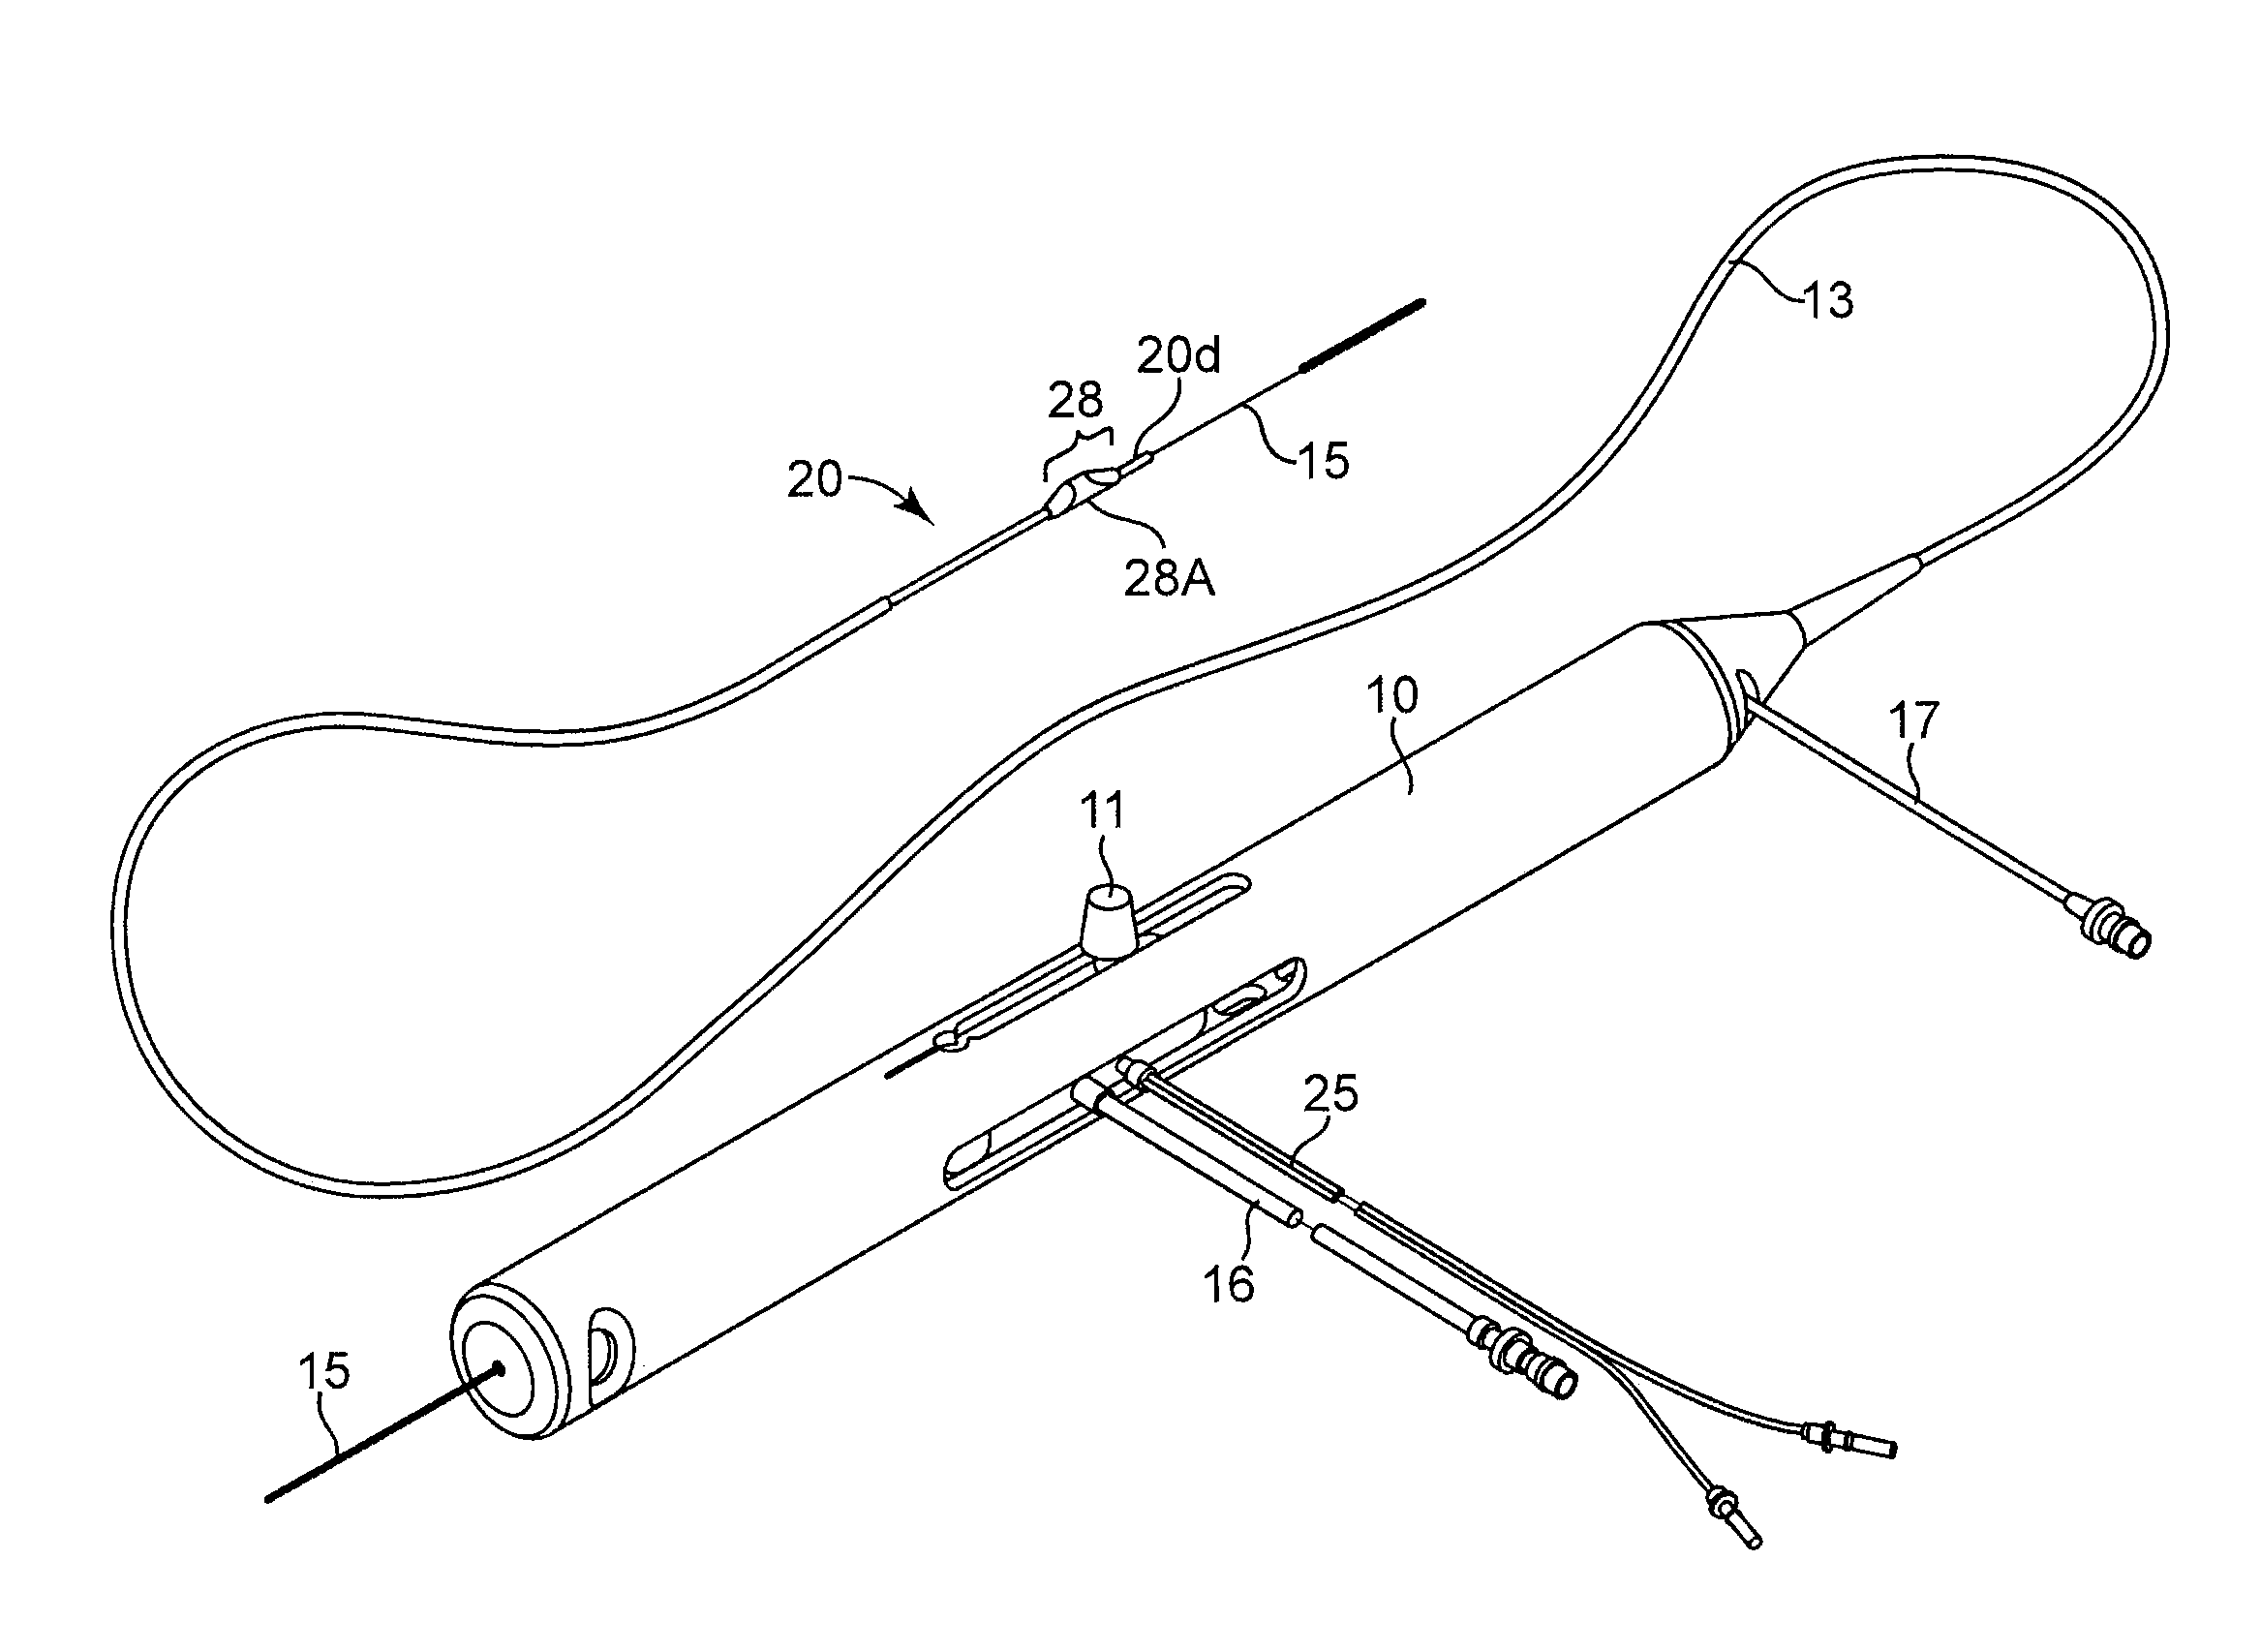 Rotational atherectomy device with pre-curved drive shaft